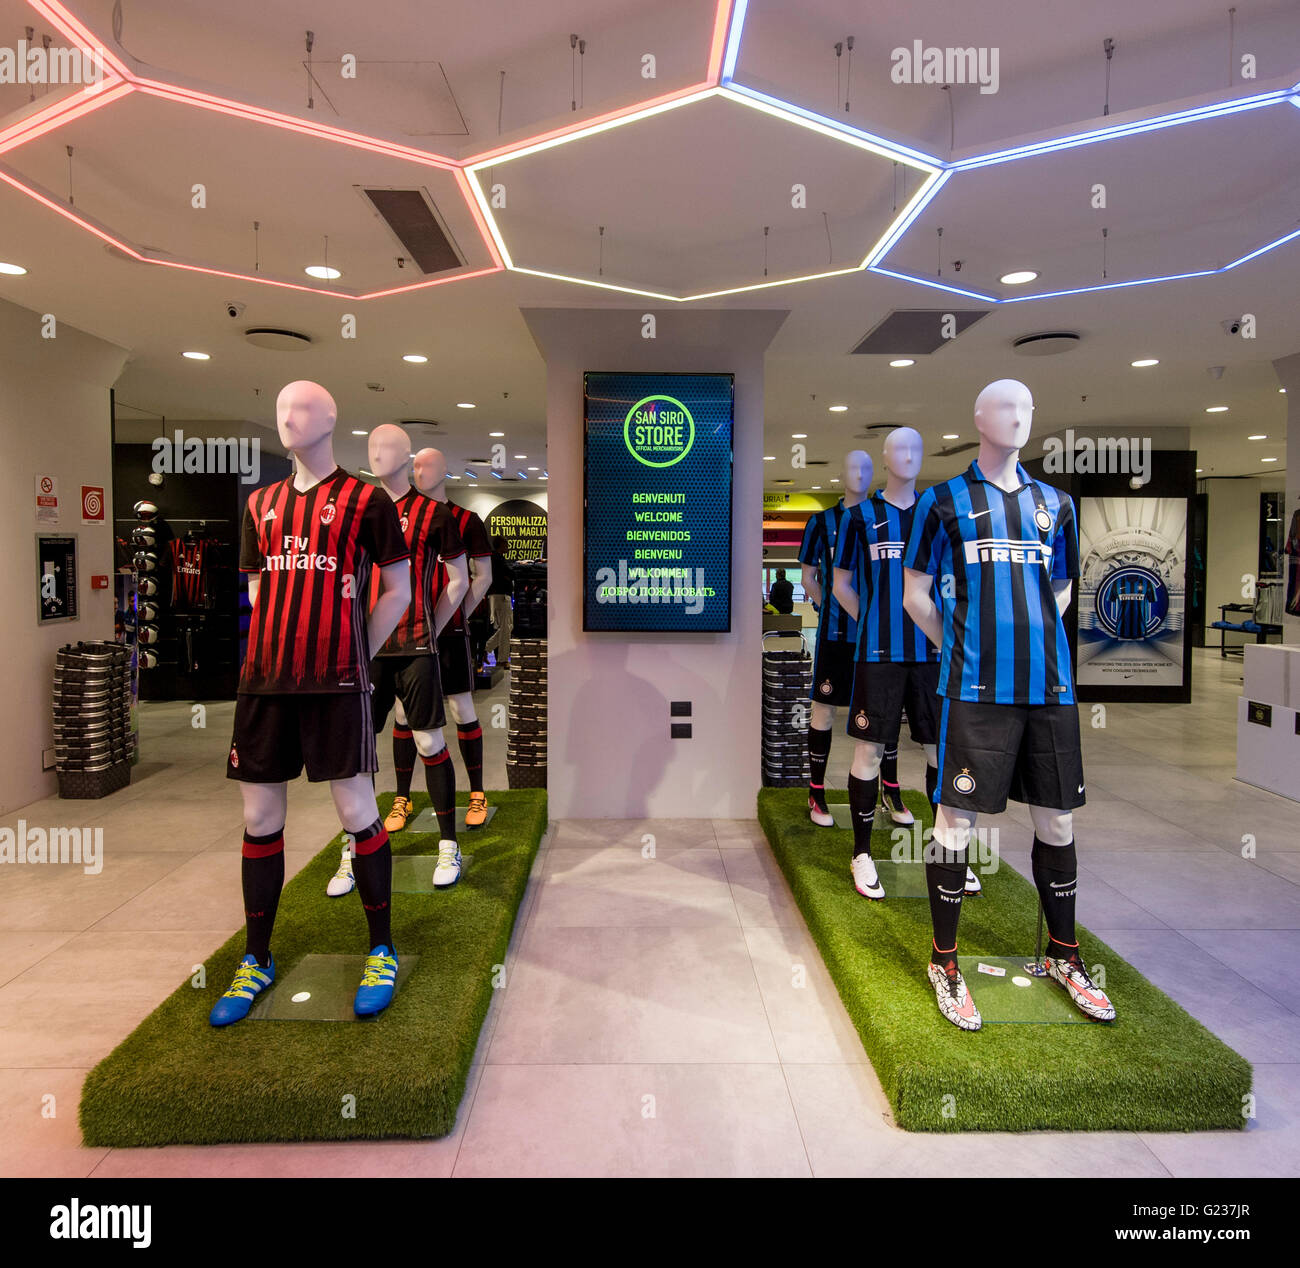 Milan, Italy. 23rd May, 2016. Official jersey of AC Milan (left) and FC  Internazionale. The store